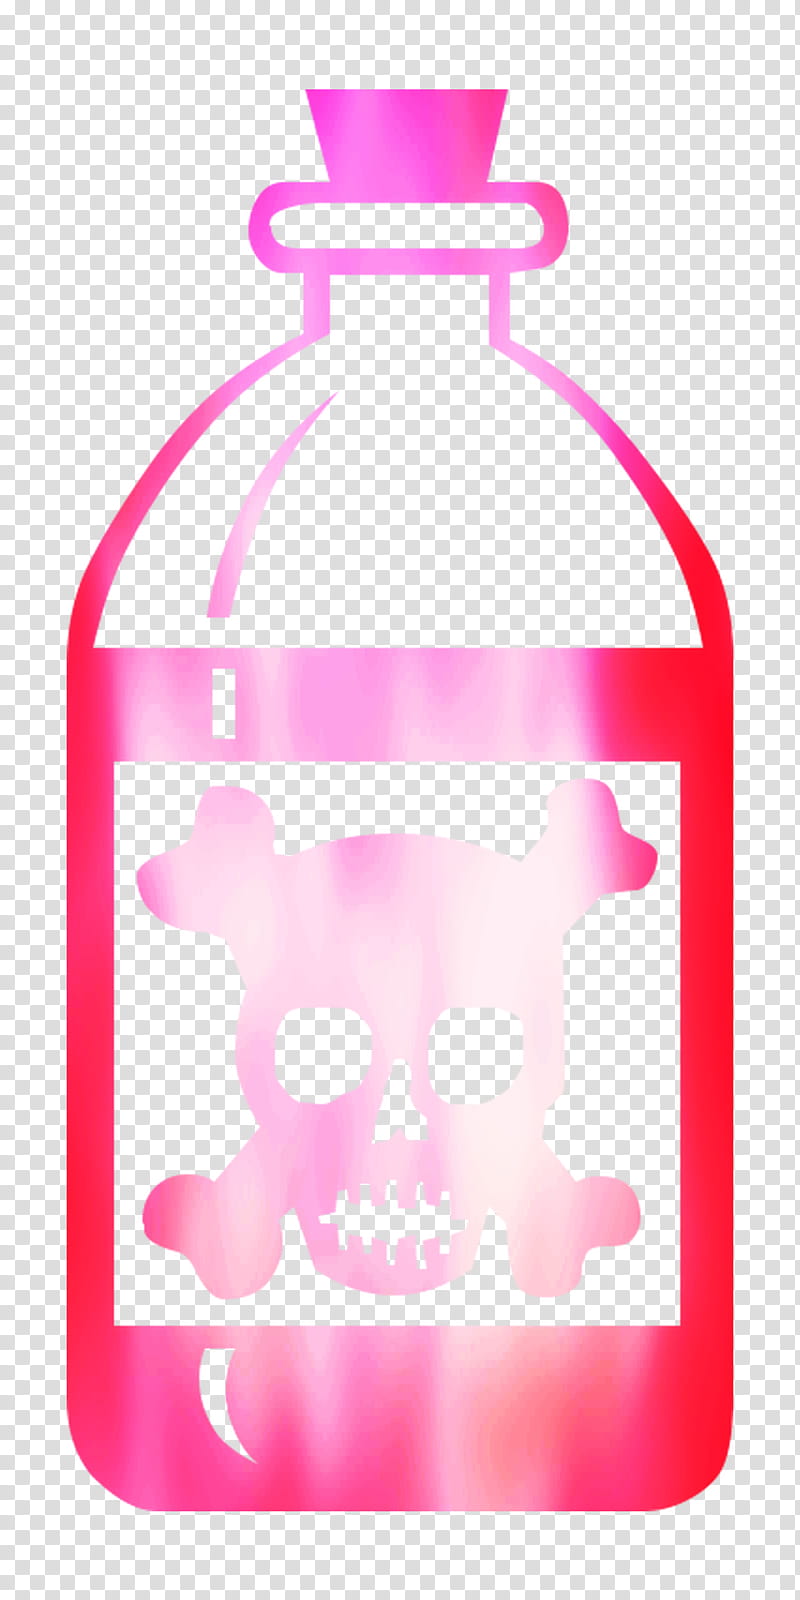 Baby Bottle, Water Bottles, Glass Bottle, Pink M, Rtv Pink, Liquidm Technology Gmbh, Drinkware, Home Accessories transparent background PNG clipart